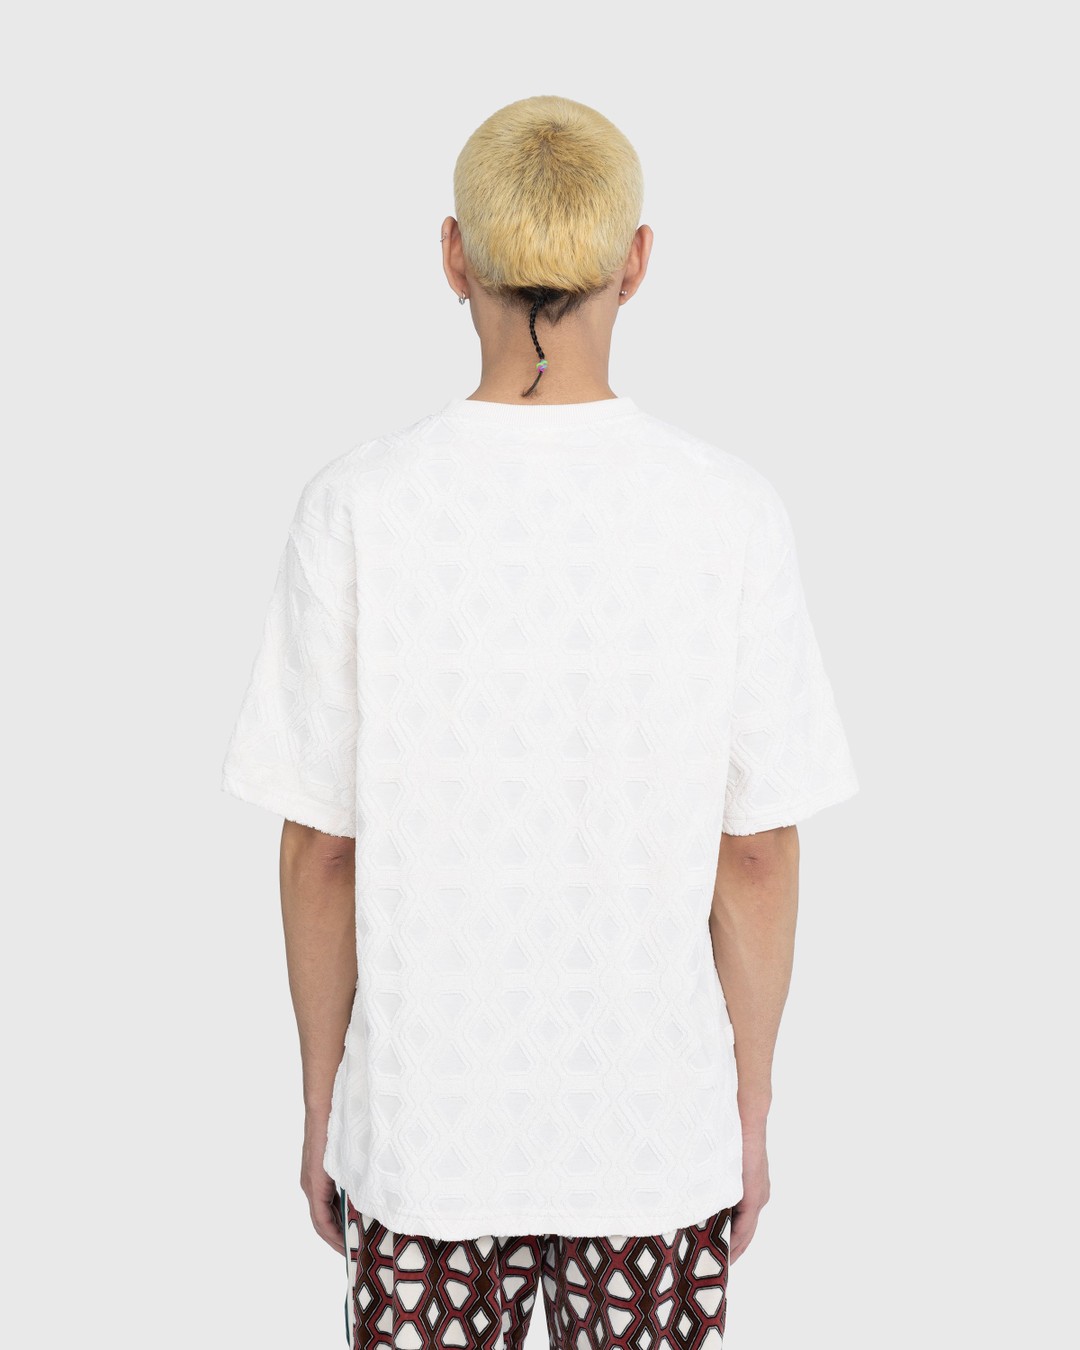 Louis Vuitton White Monogram T Shirt for Sale in New York, NY